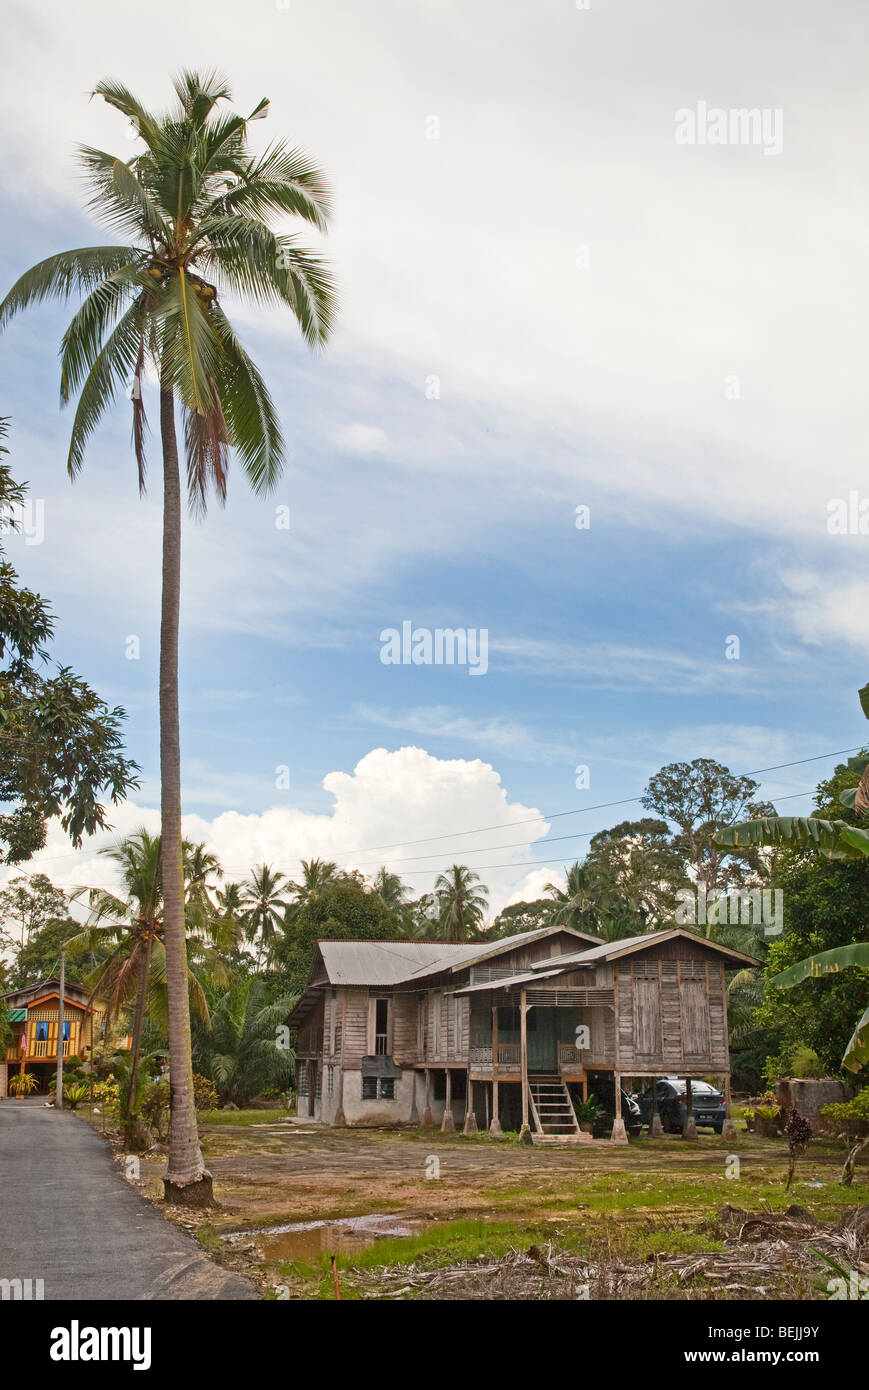 Typical Malay wooden Kampung house on stilts, Malaysia Stock Photo